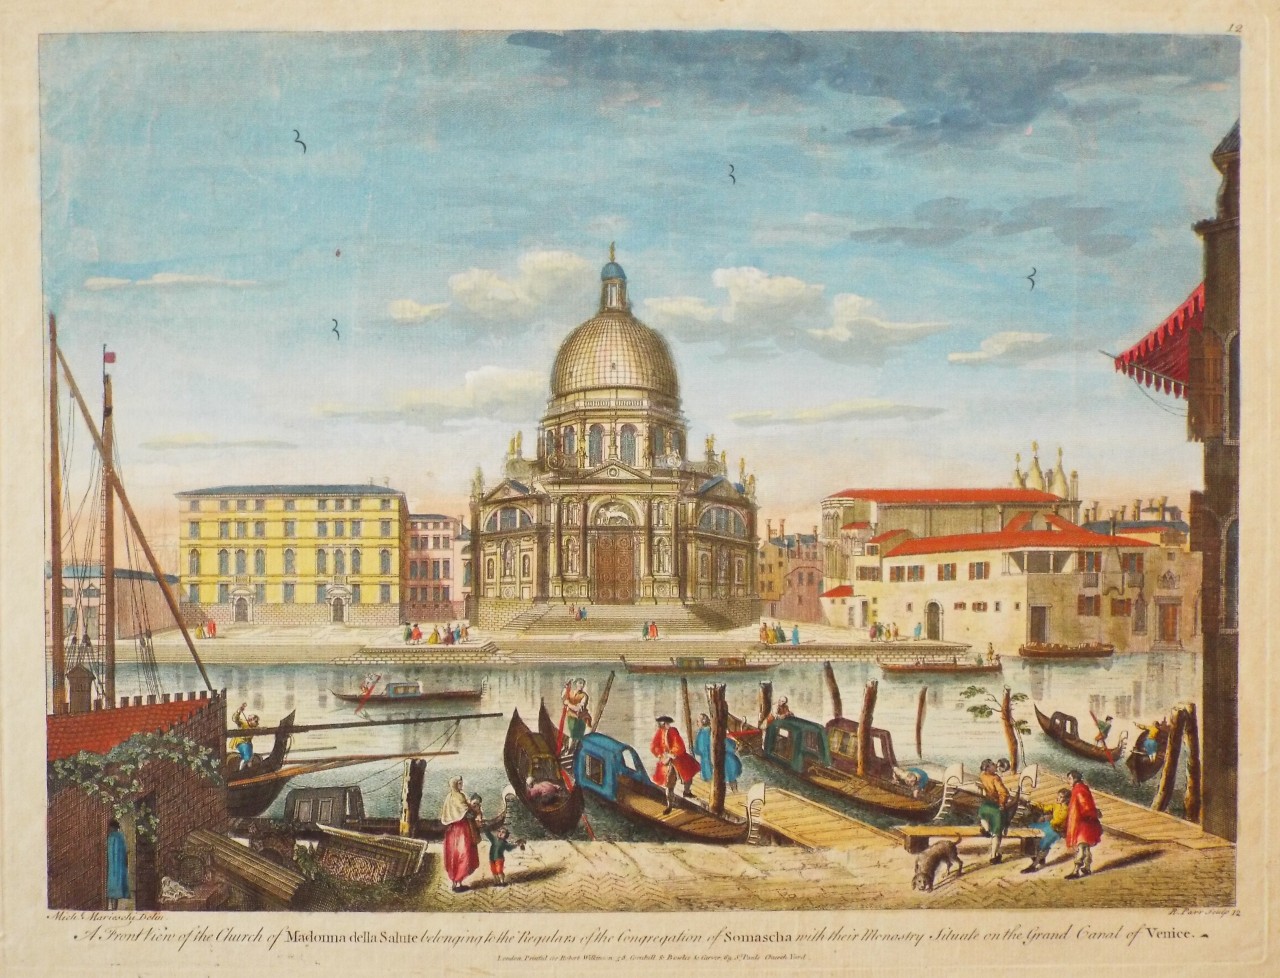 Print - A Front View of the Church of Madonna della Salute belonging to the Regulars of the Congregation of Somascha with their Monastery Situate on the Grand Canal of Venice. - Parr